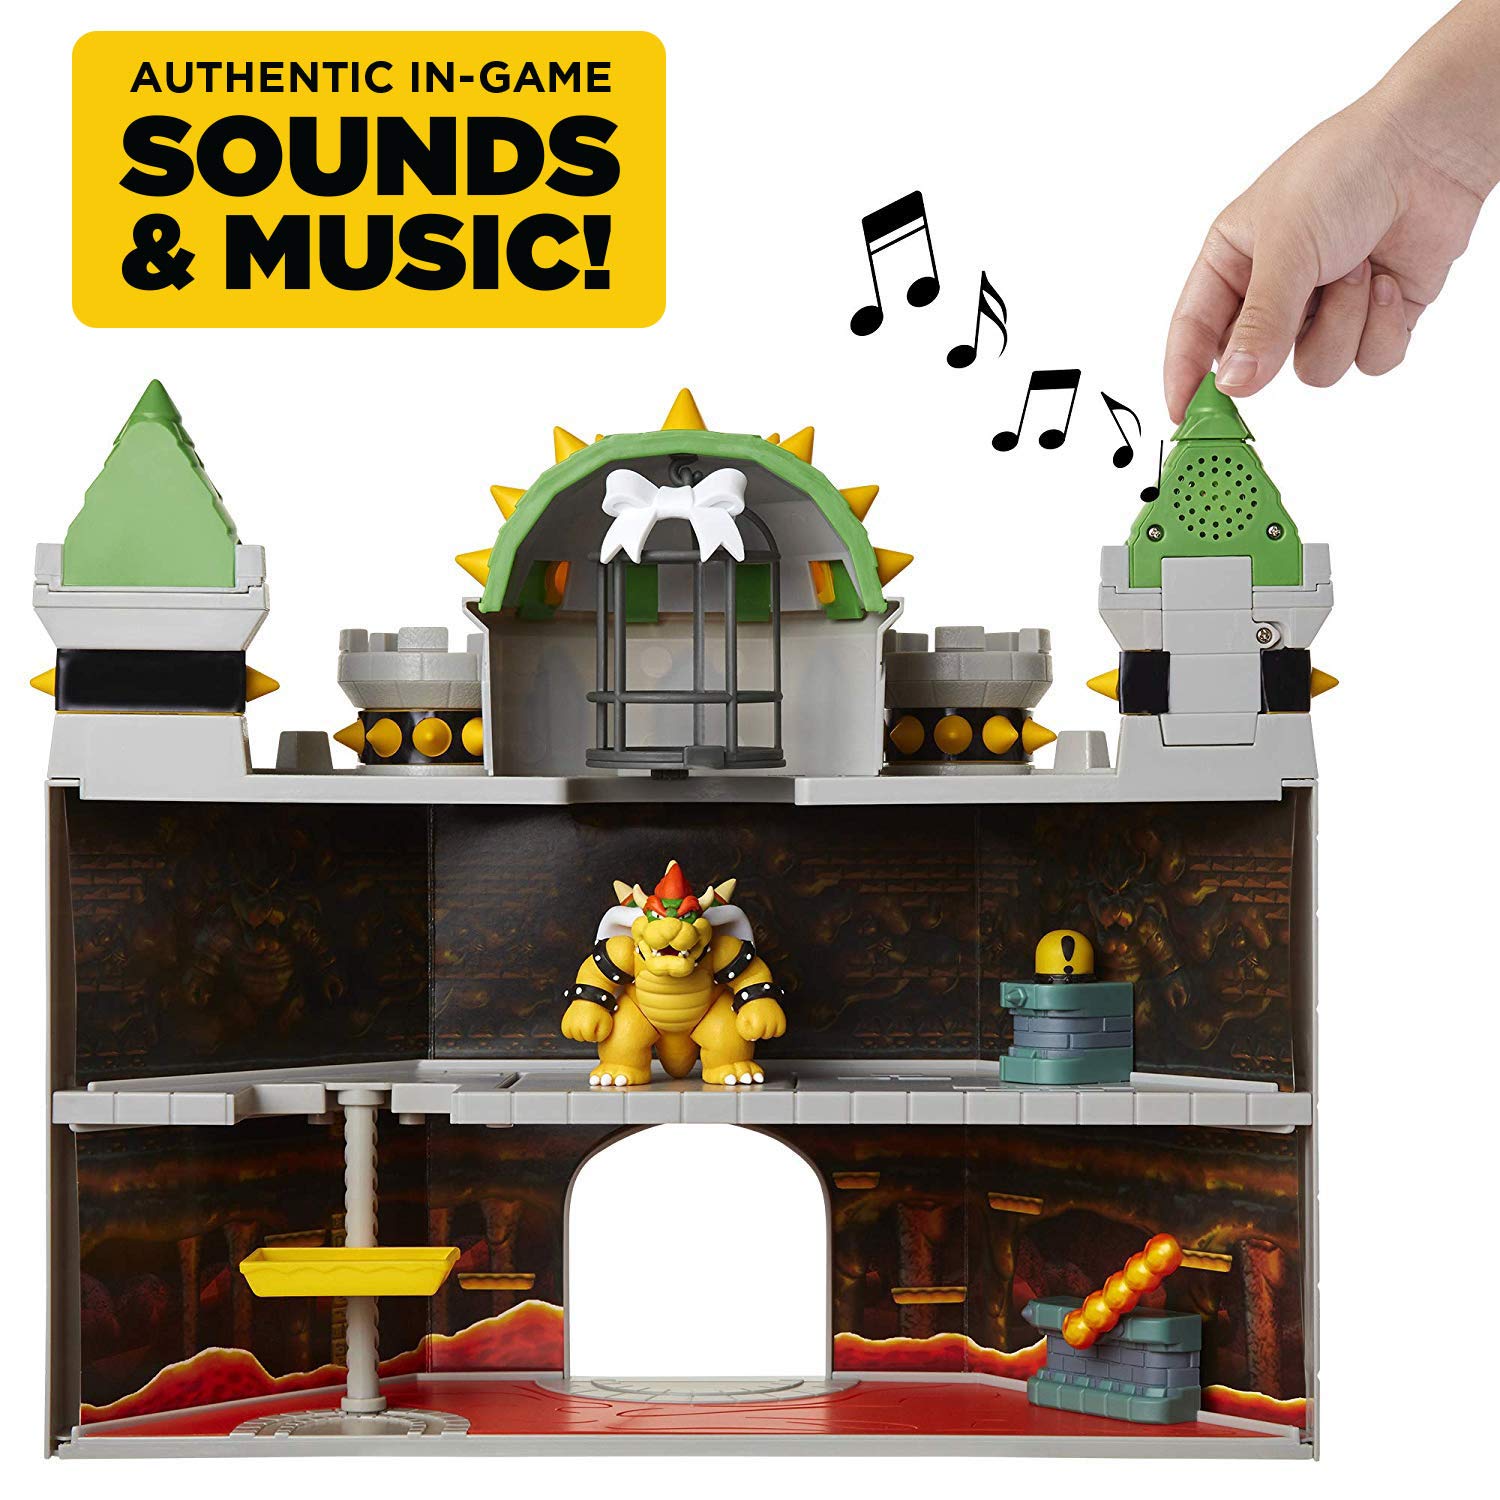 Super Mario 400204 Nintendo Deluxe Bowser's Castle Playset with 2.5